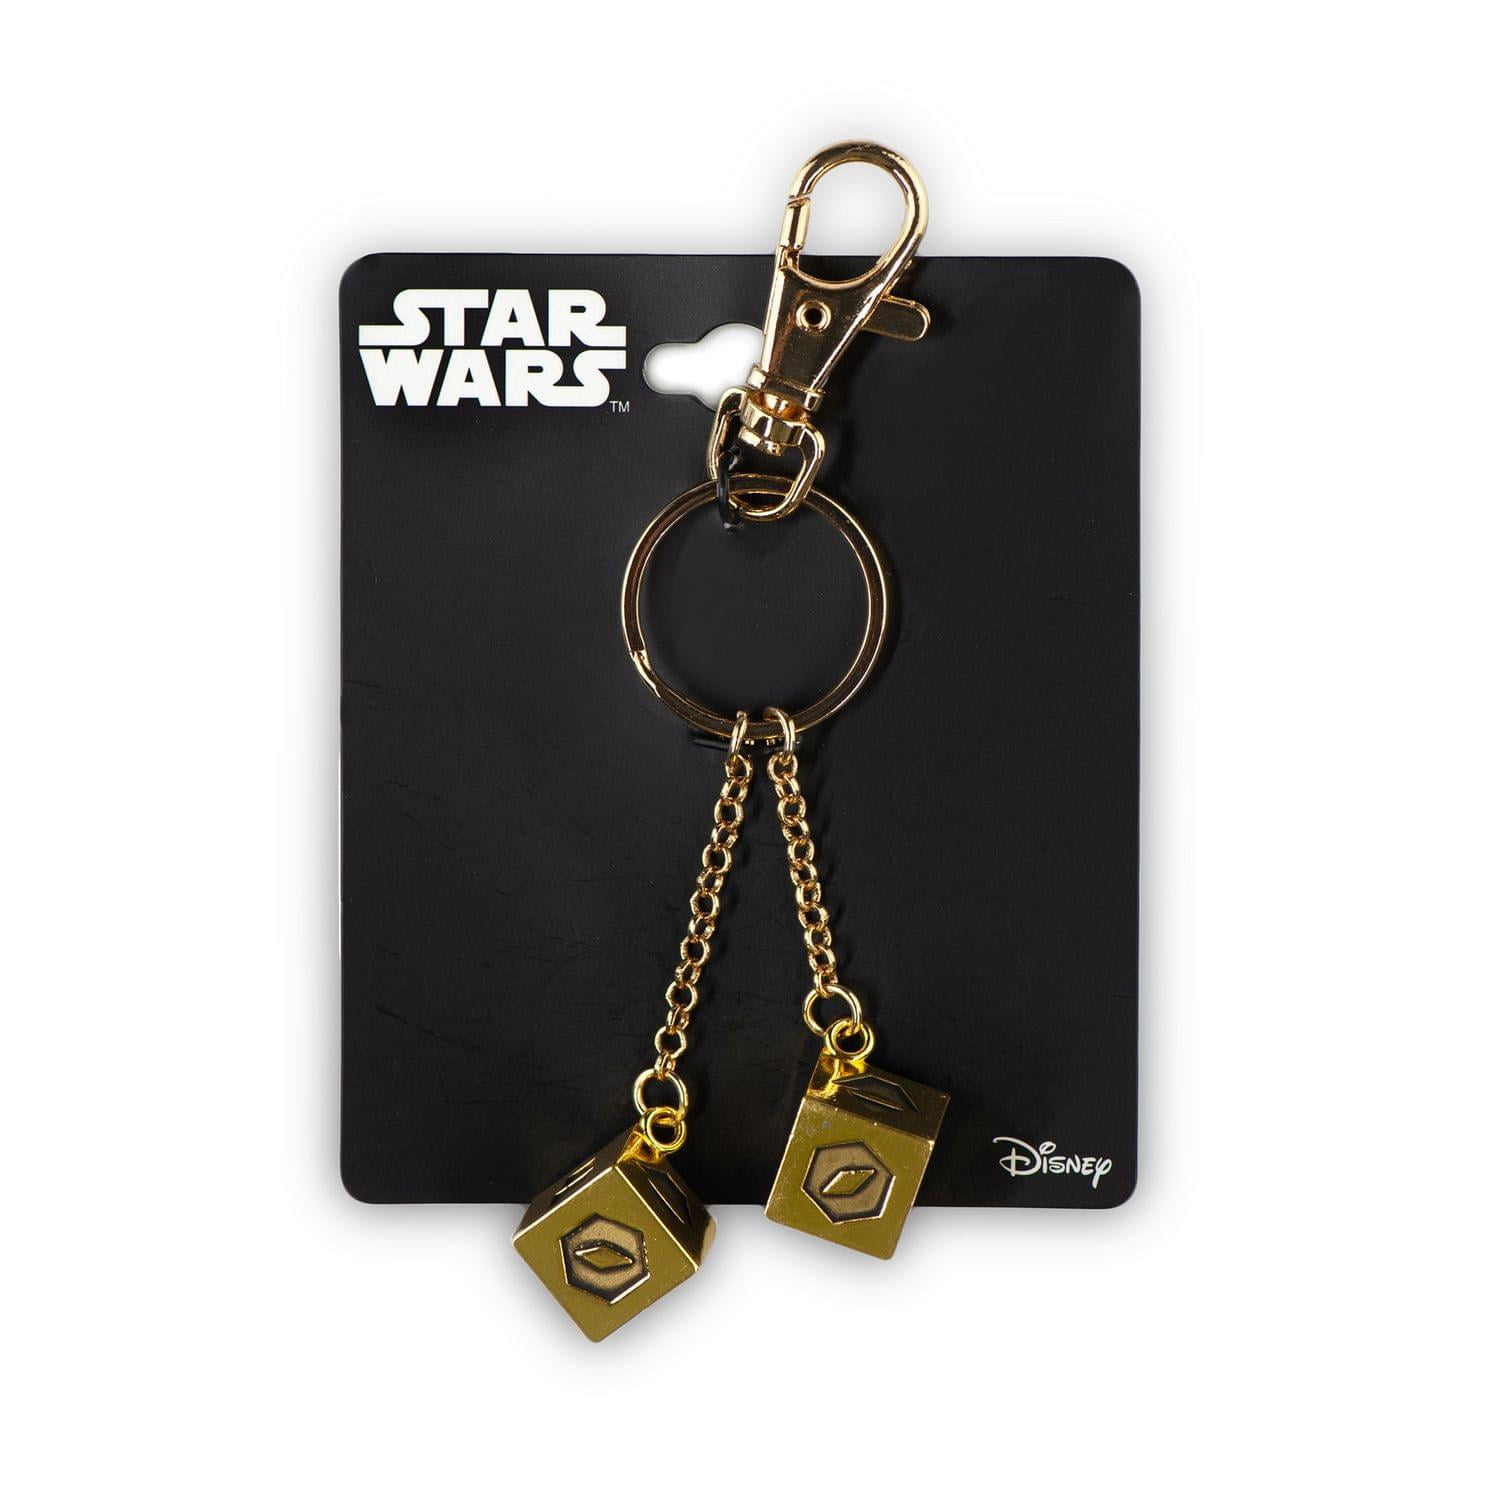 Official Star Wars Keychains